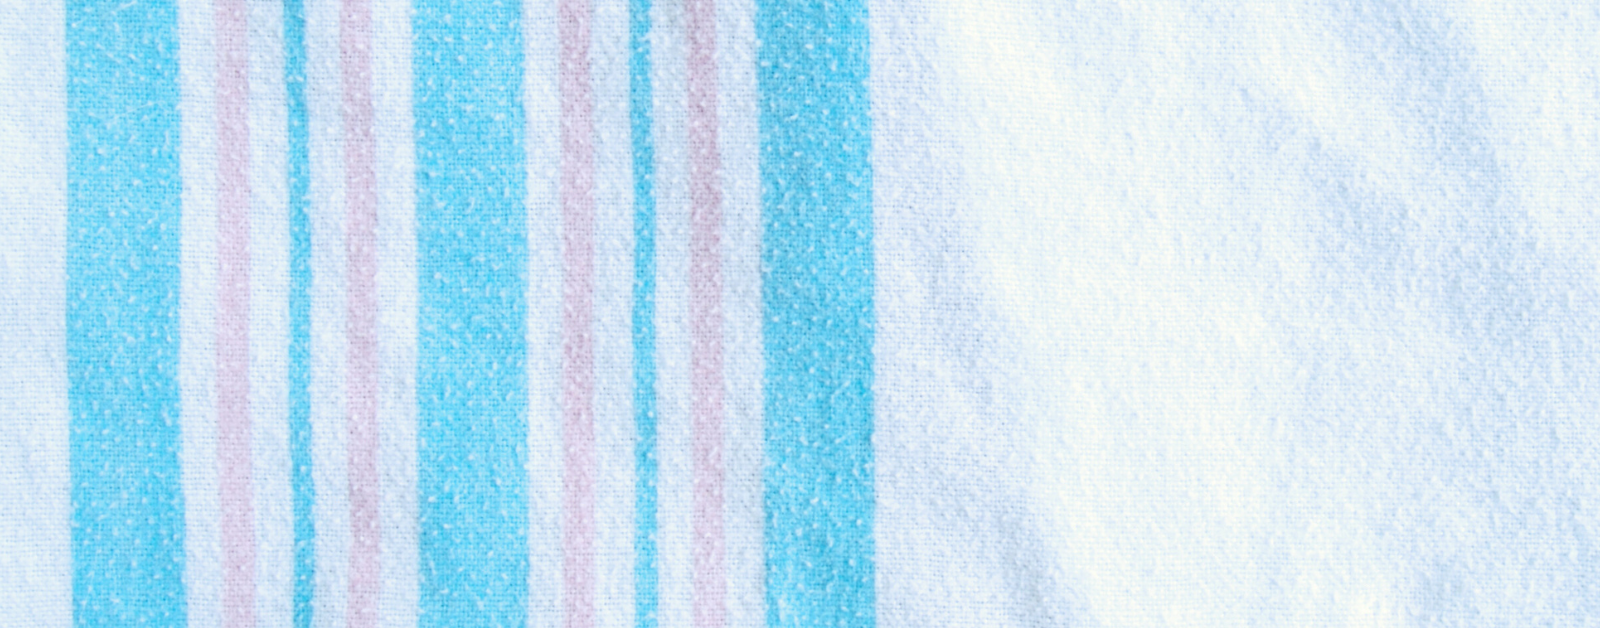 the traditional blue and pink striped blanket that babies are wrapped in in the hospital